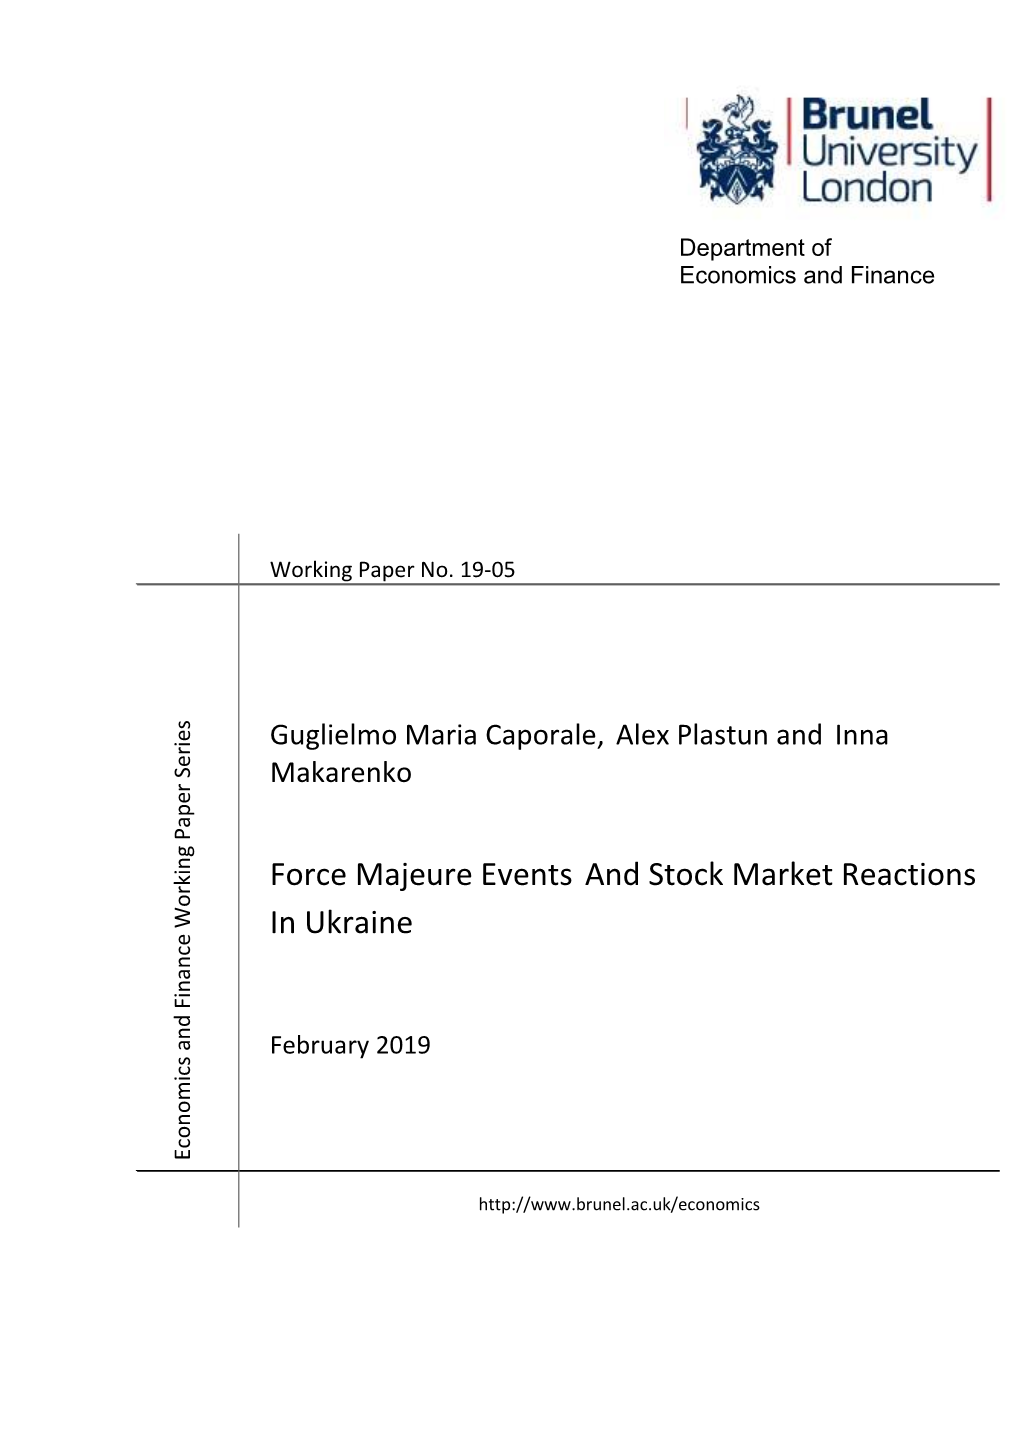 Force Majeure Events and Stock Market Reactions in Ukraine